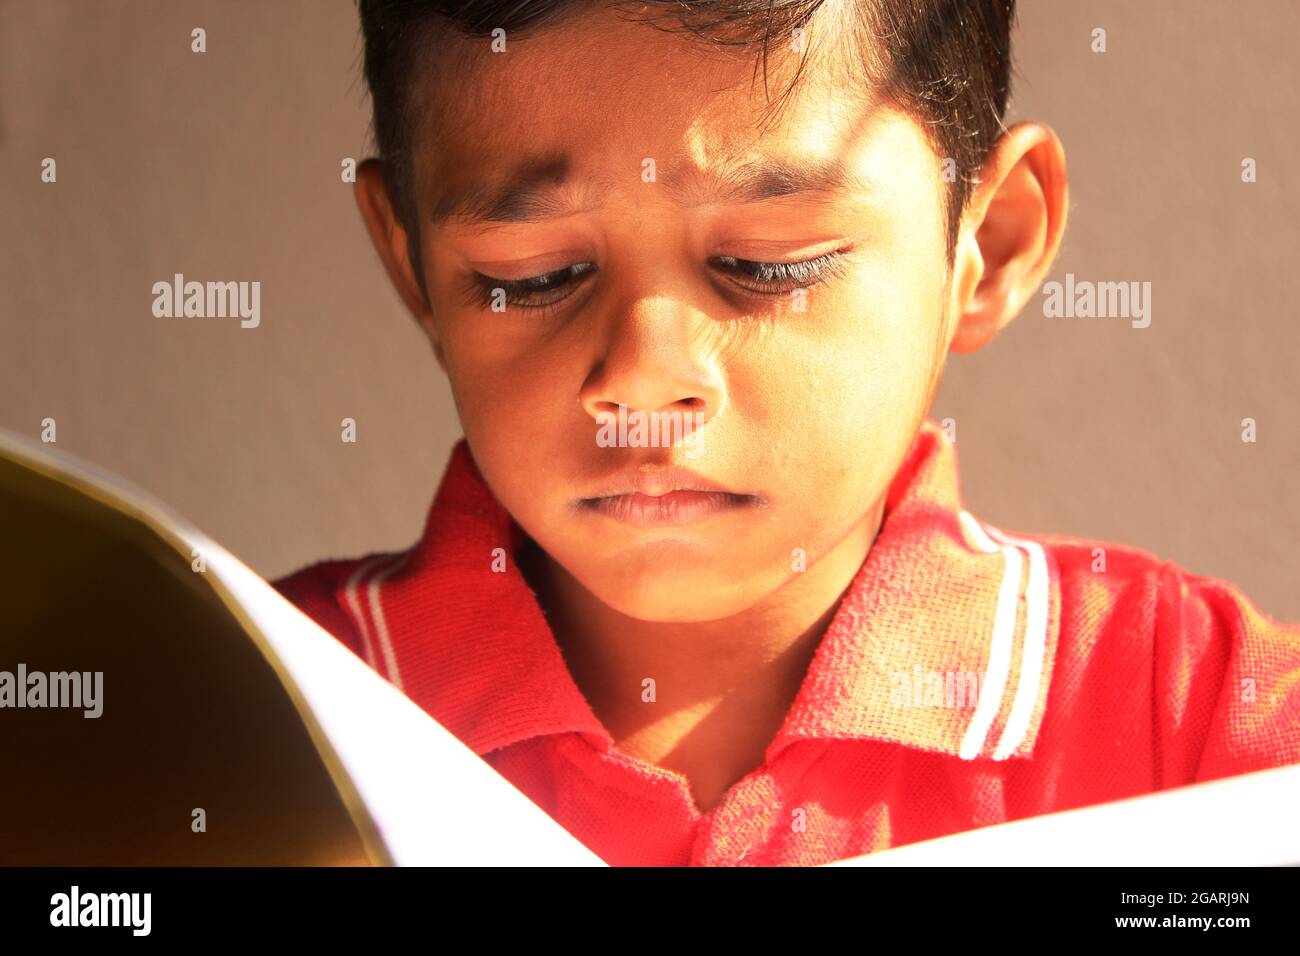 Indian School Kids Students Notebook Writing Study Education In Class,bord Stock Photo